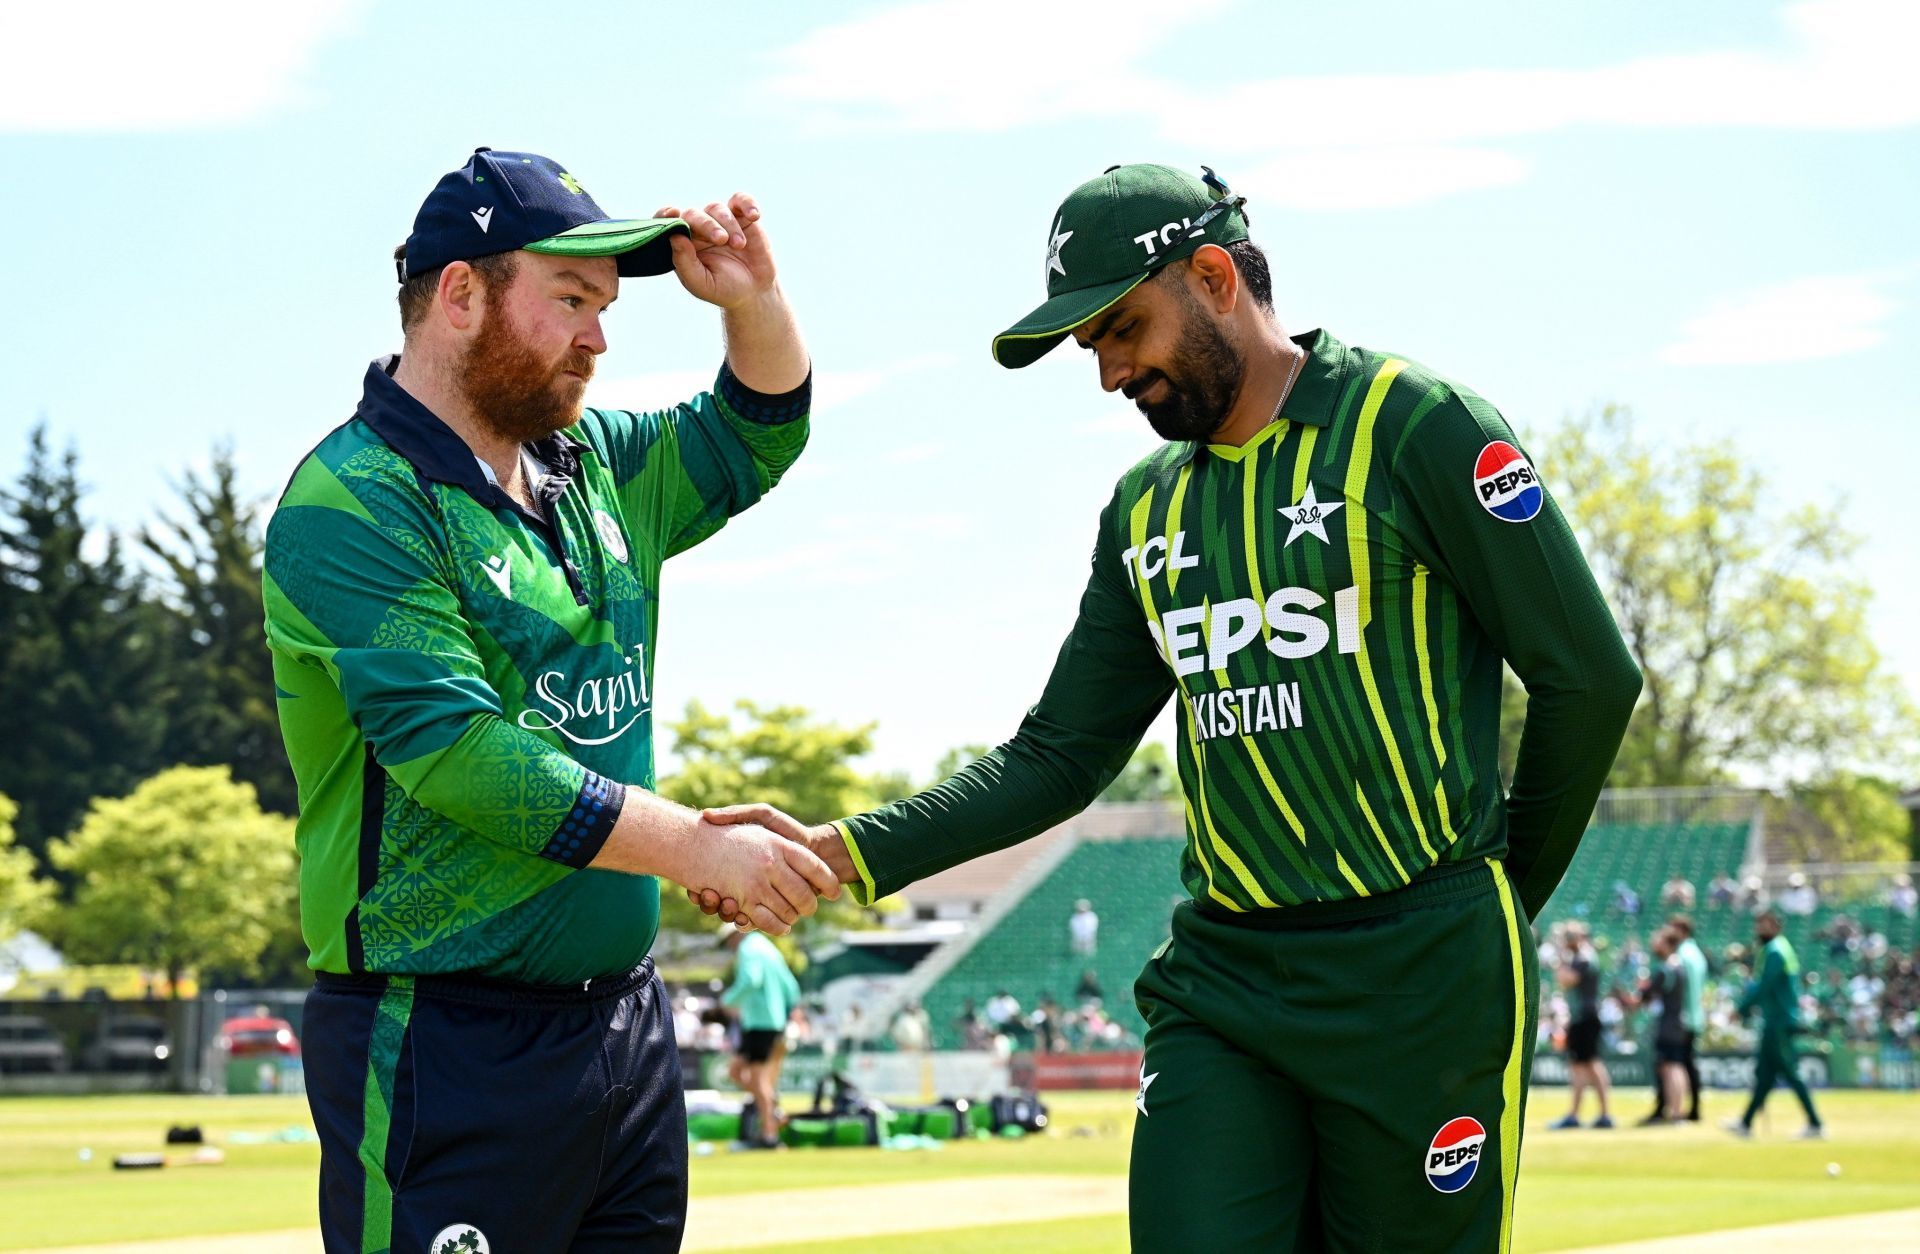 Paul Stirling with Babar Azam at the toss. (Credits: Twitter)